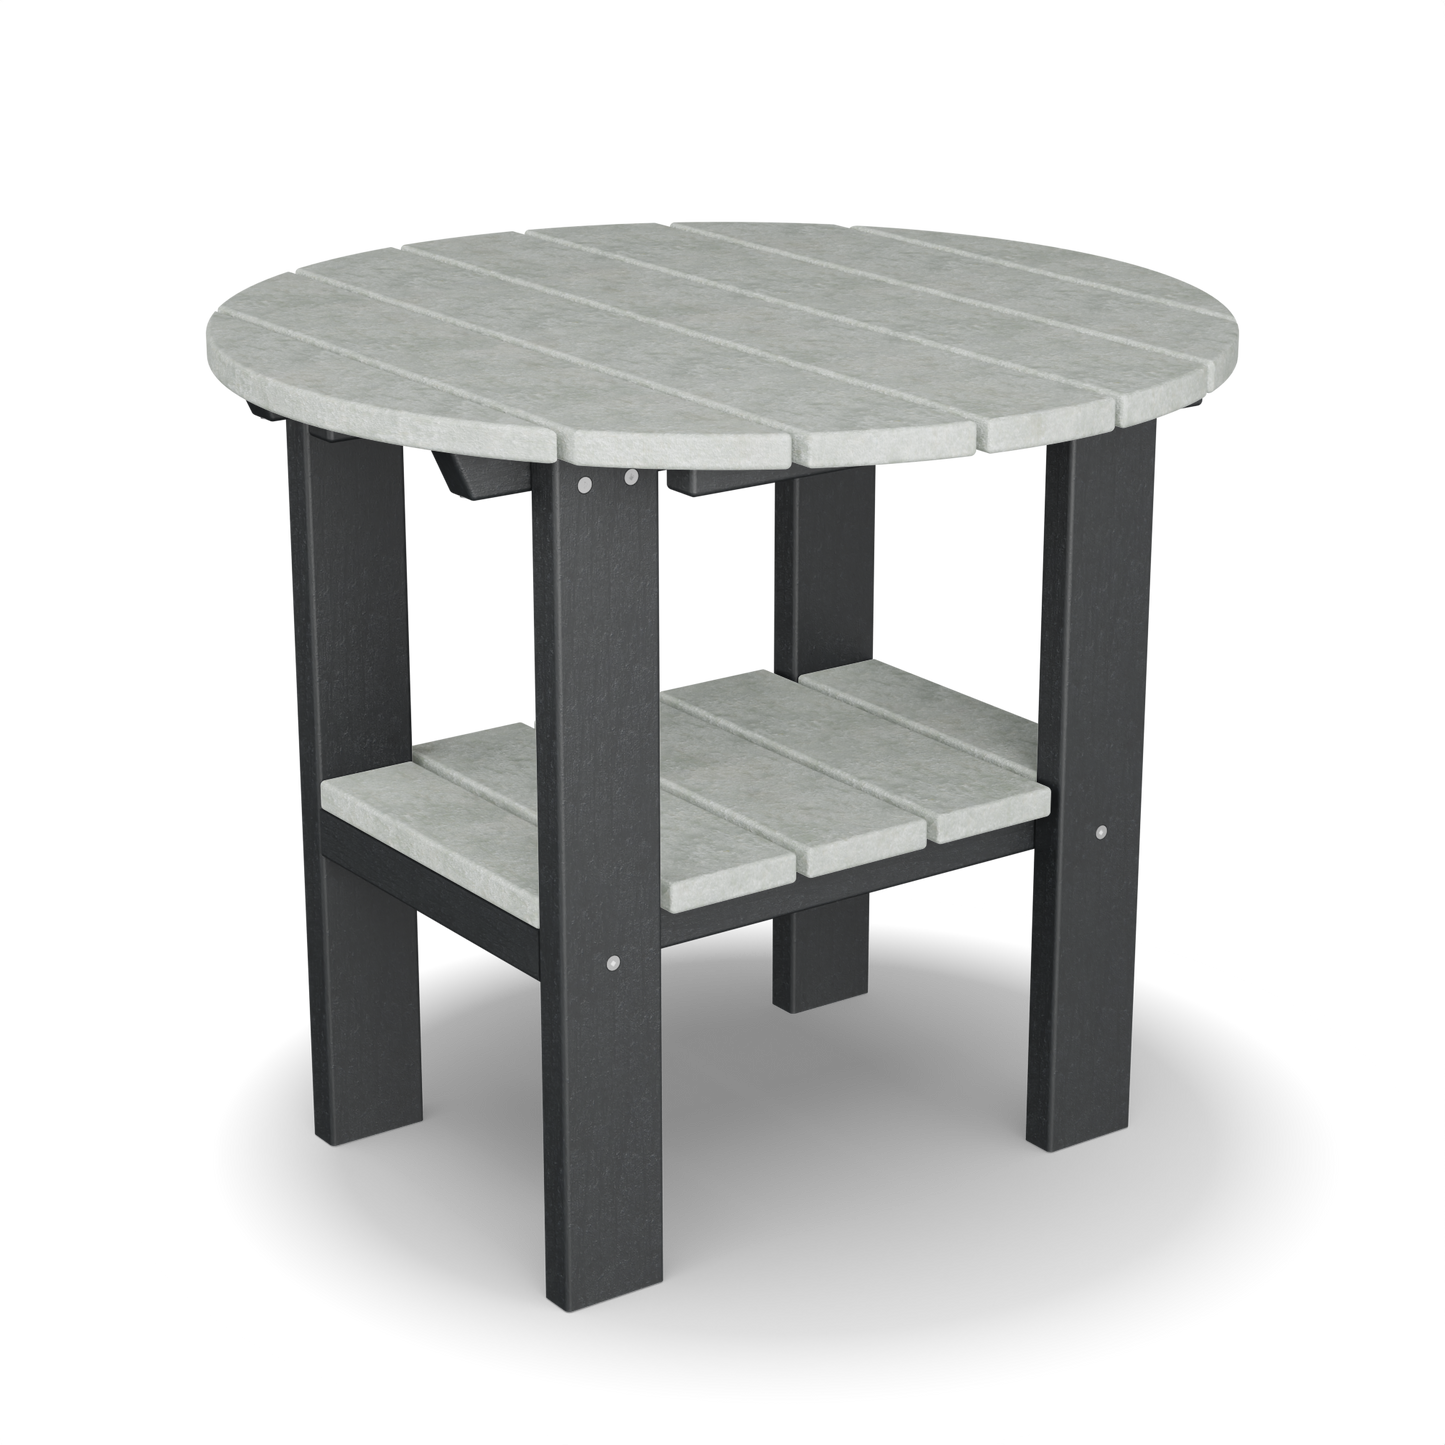 Wildridge Recycled Plastic Classic Round Side Table - LEAD TIME TO SHIP 6 WEEKS OR LESS